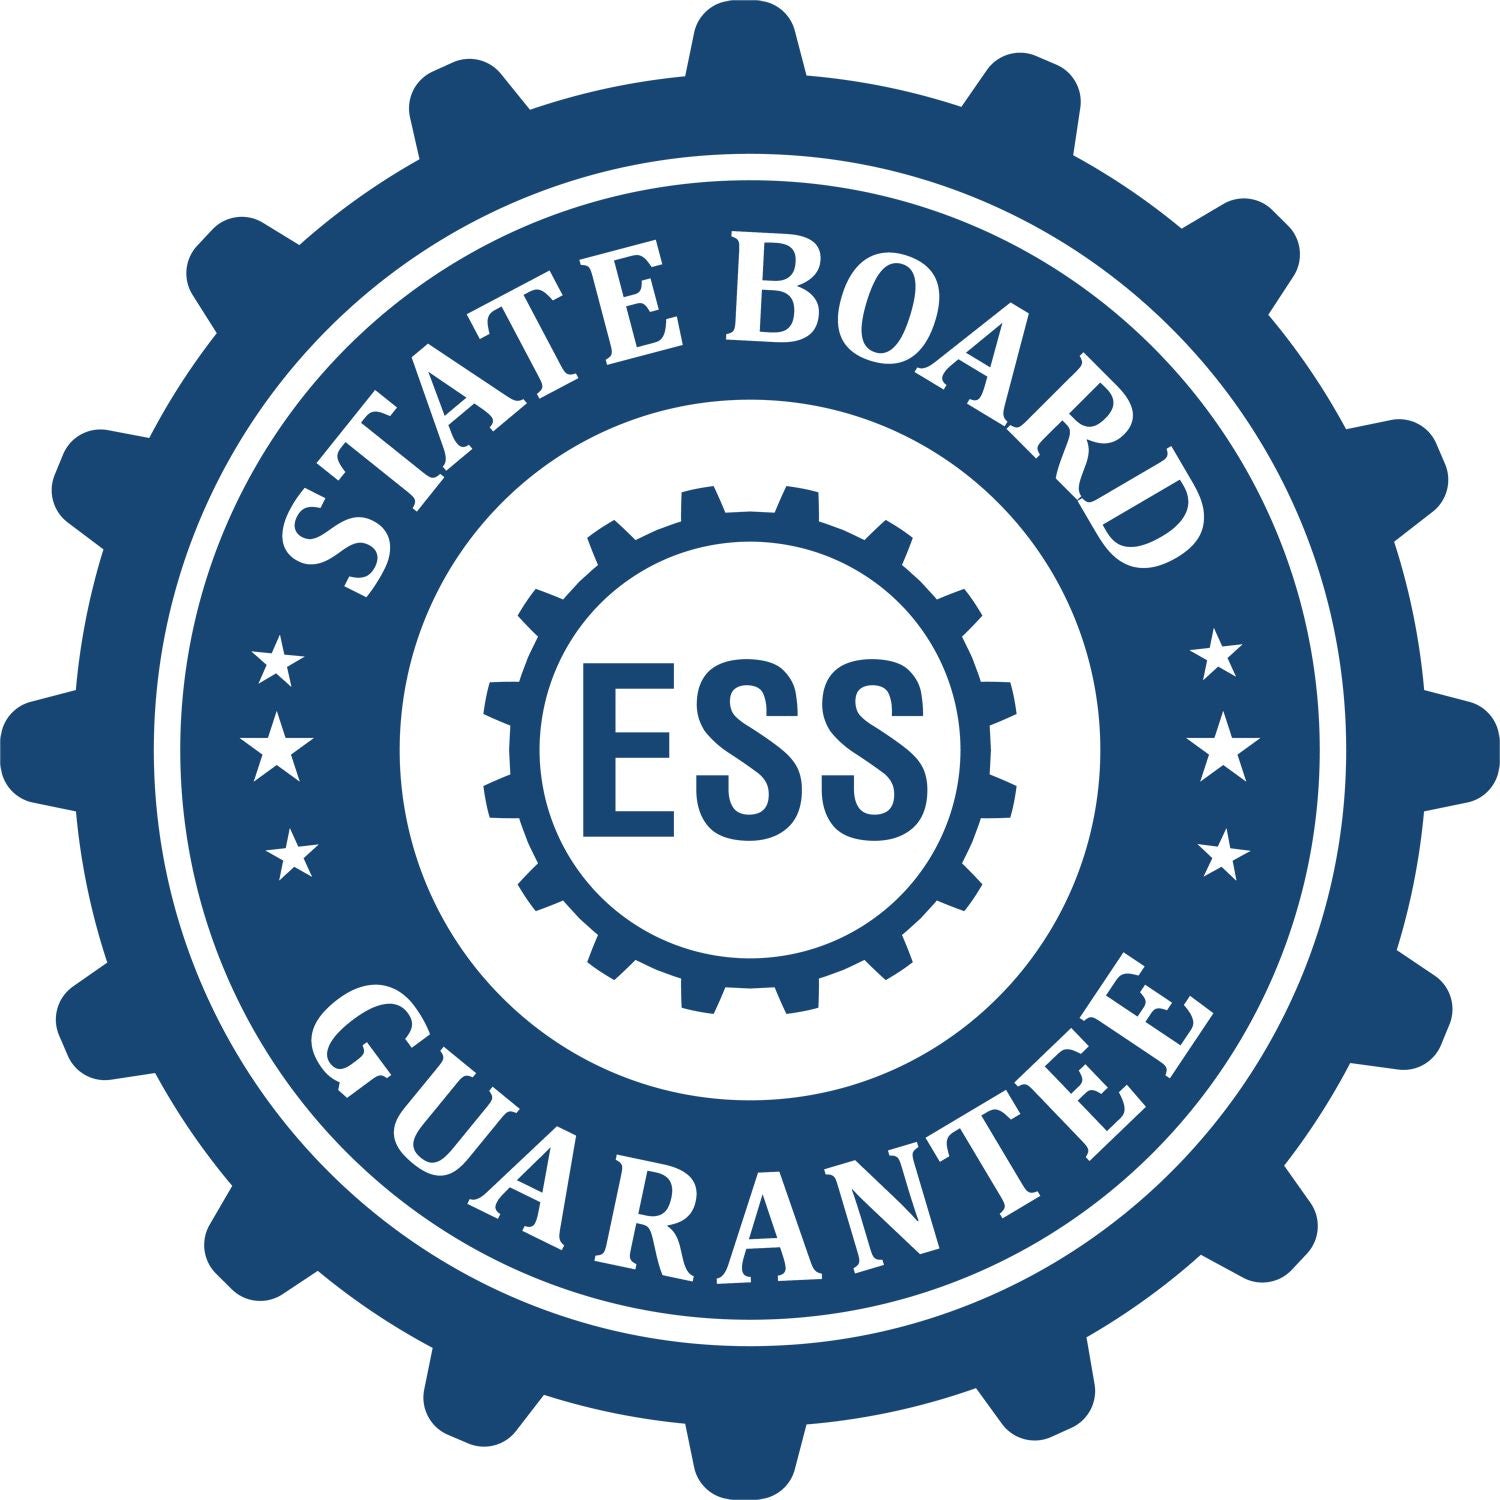 An emblem in a gear shape illustrating a state board guarantee for the State of Puerto Rico Extended Long Reach Engineer Seal product.